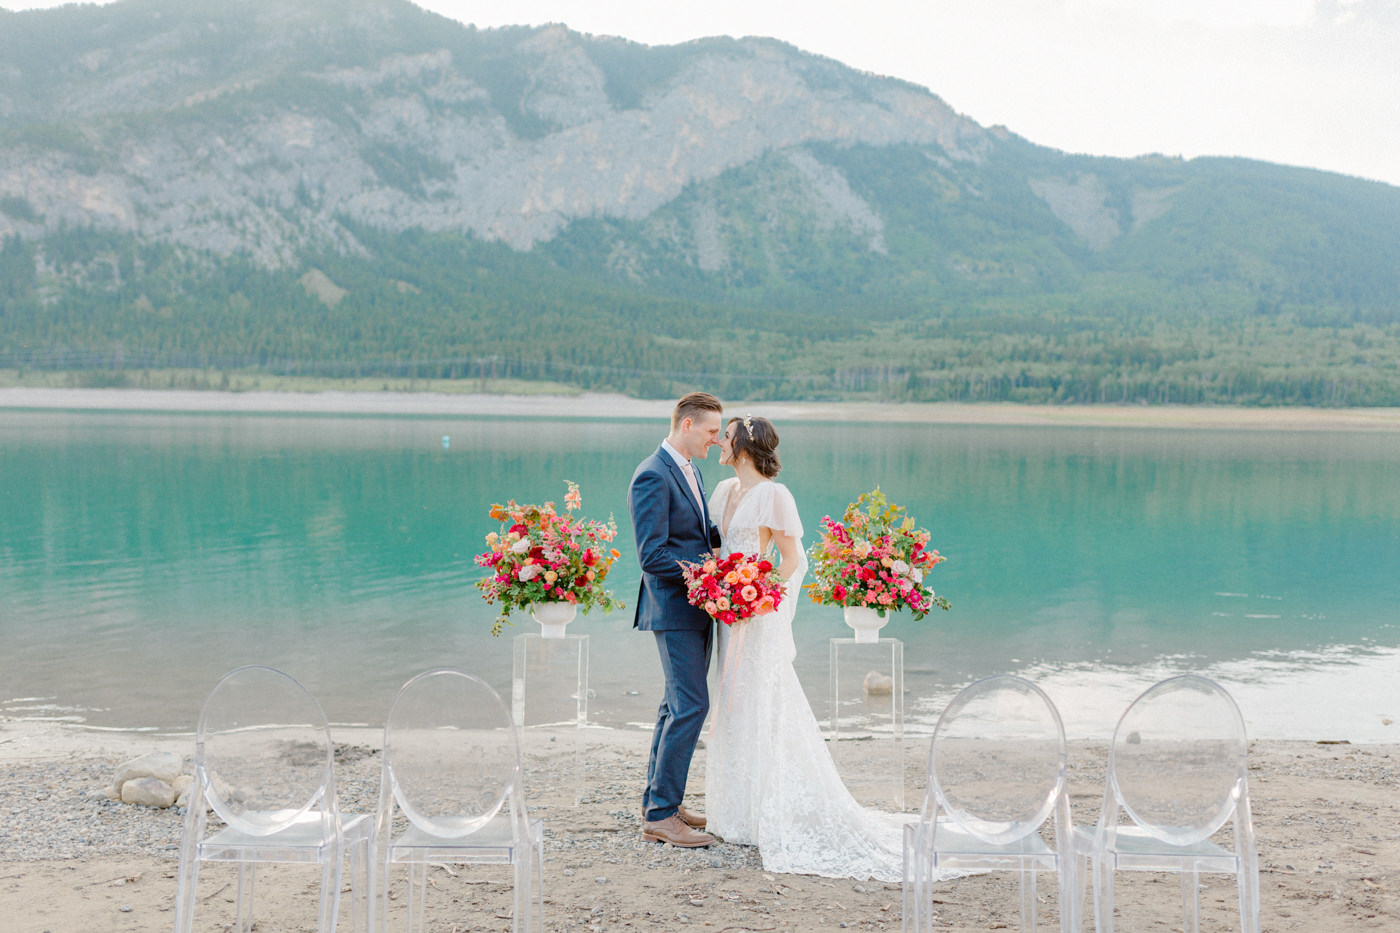 Dreamy lakeside wedding inspiration at Barrier Lake in Alberta Canada